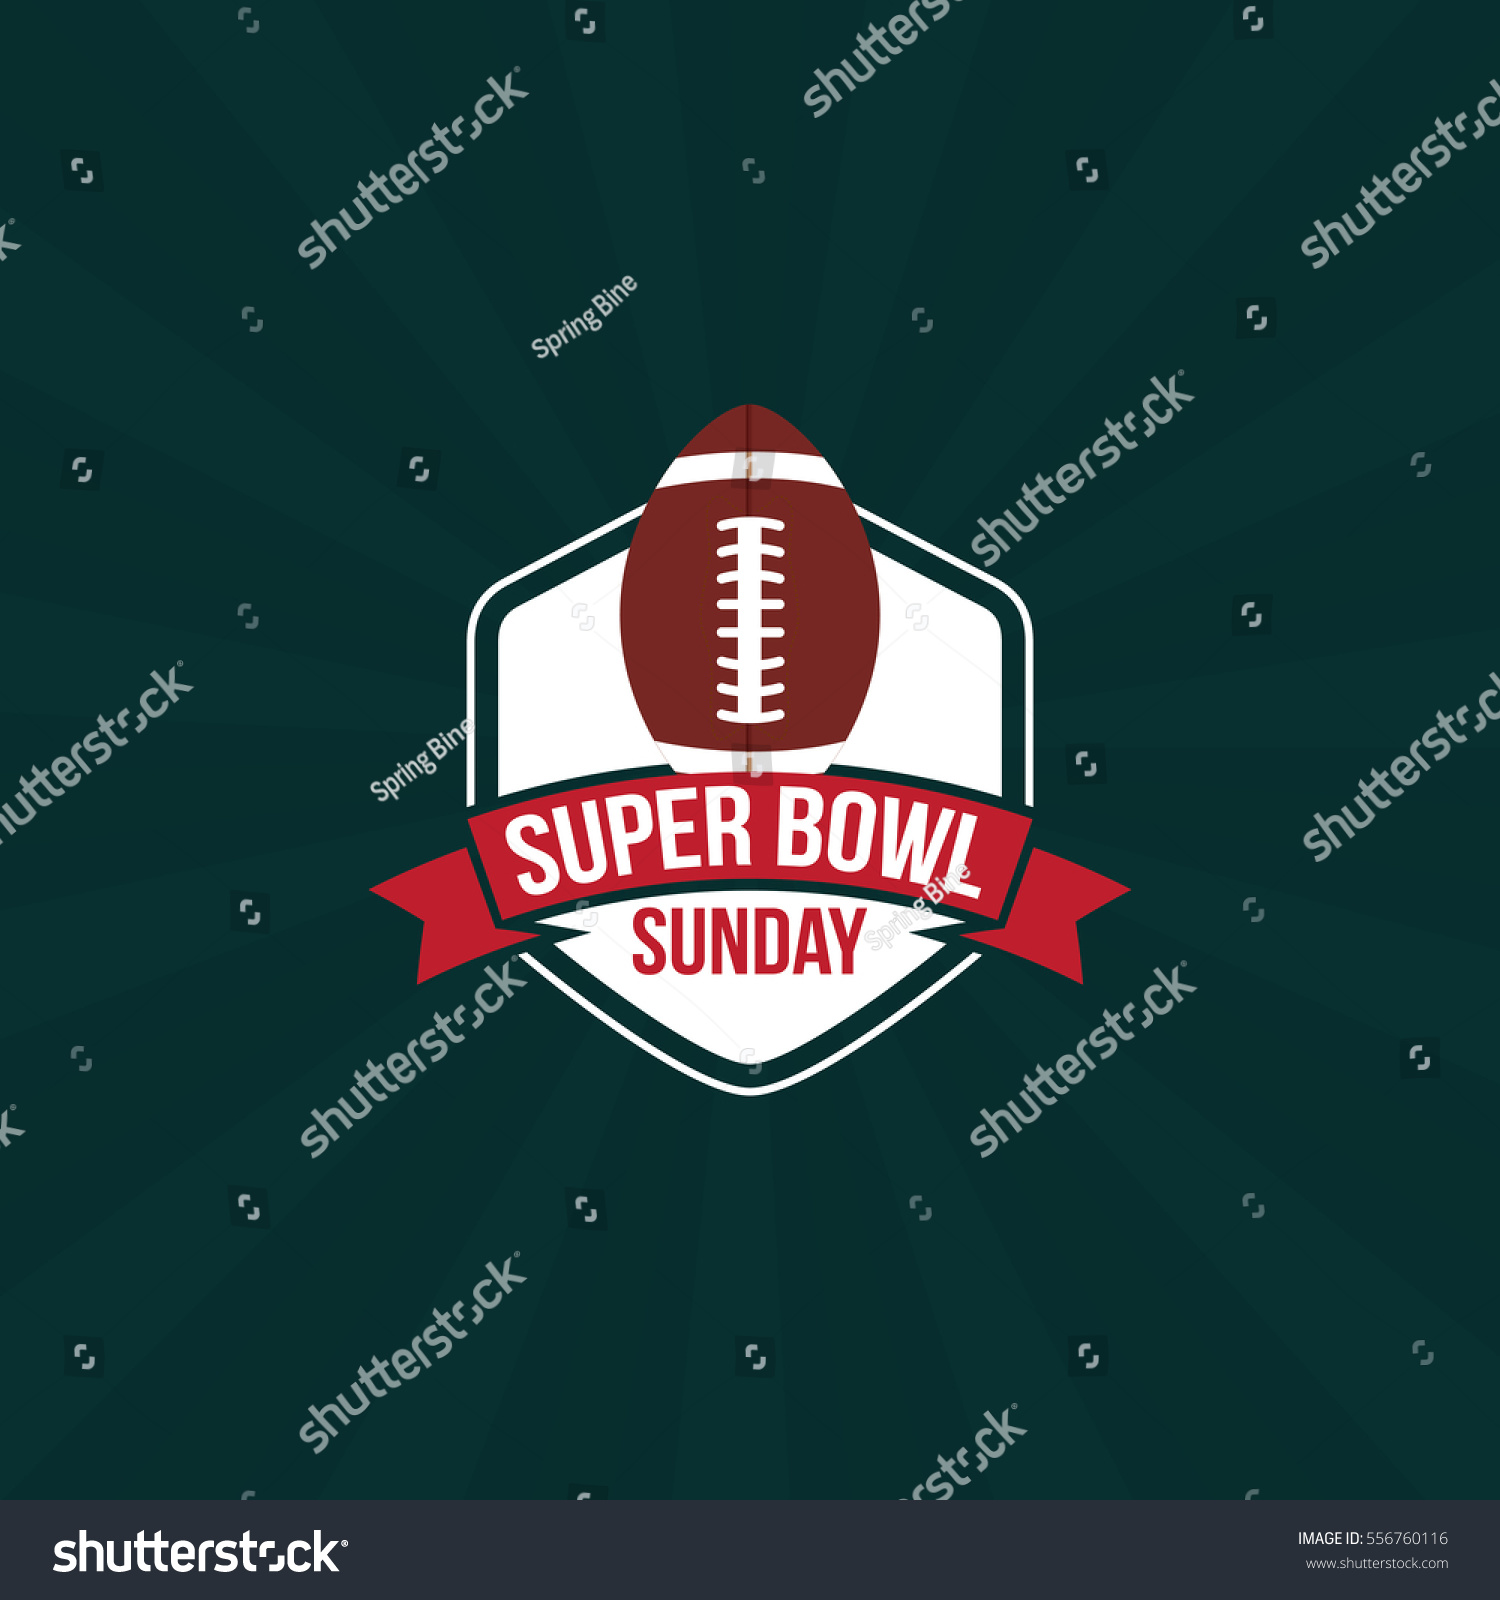 Super Bowl Weekend Party Vector Illustration Stock Vector (Royalty Free